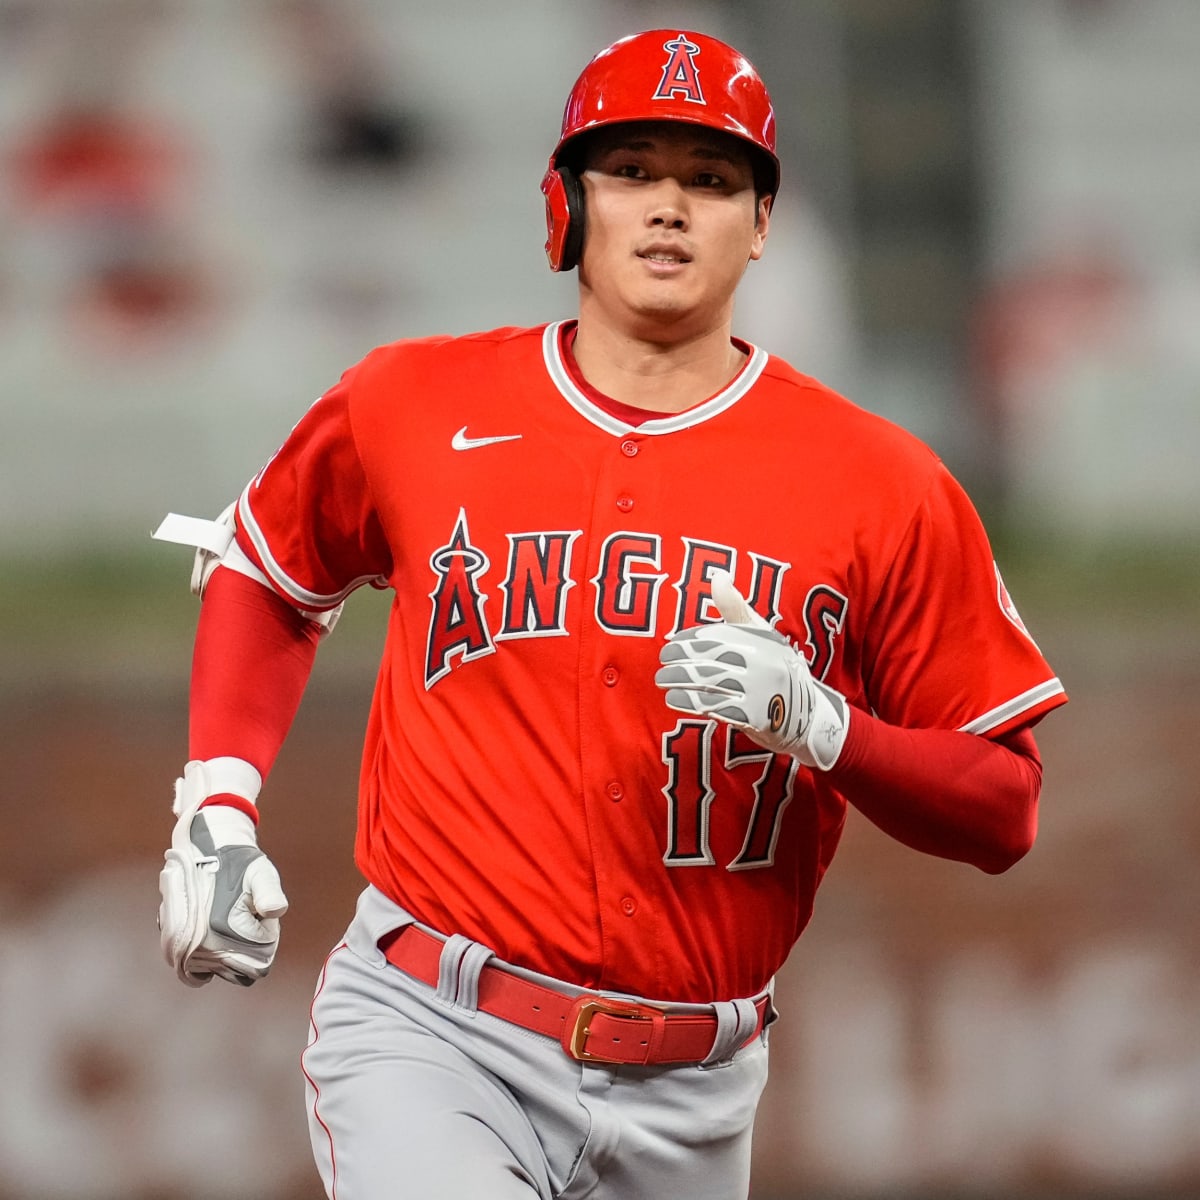 New York Mets signing Shohei Ohtani is depressingly unrealistic